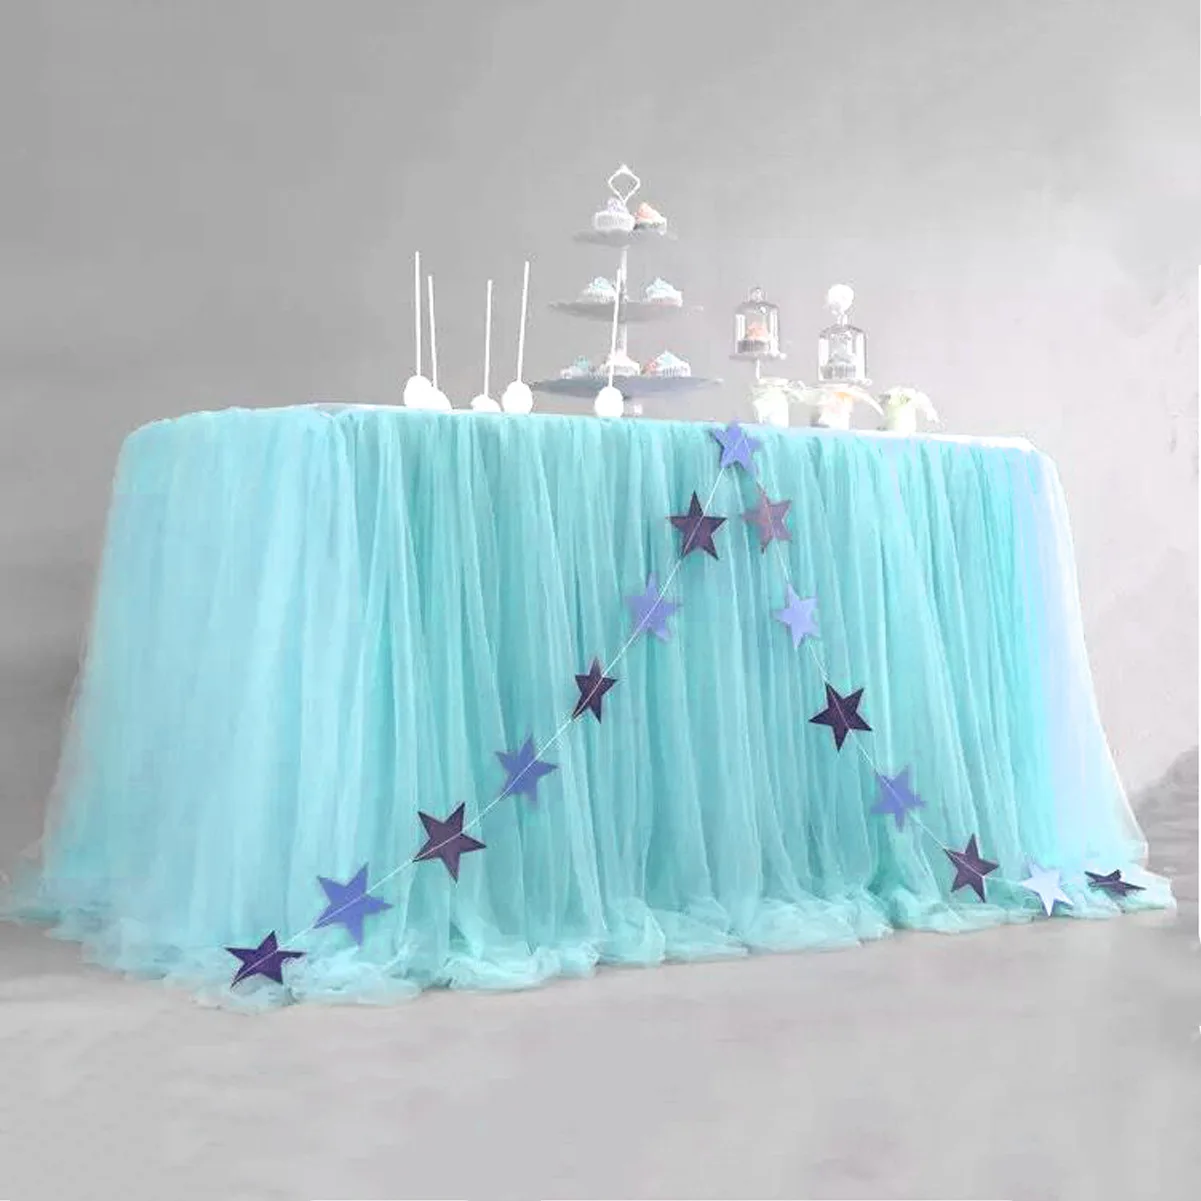 Details about   39'' Thanksgiving Tulle Table Skirt Tableware Cover Wedding Birthday Party Decor 